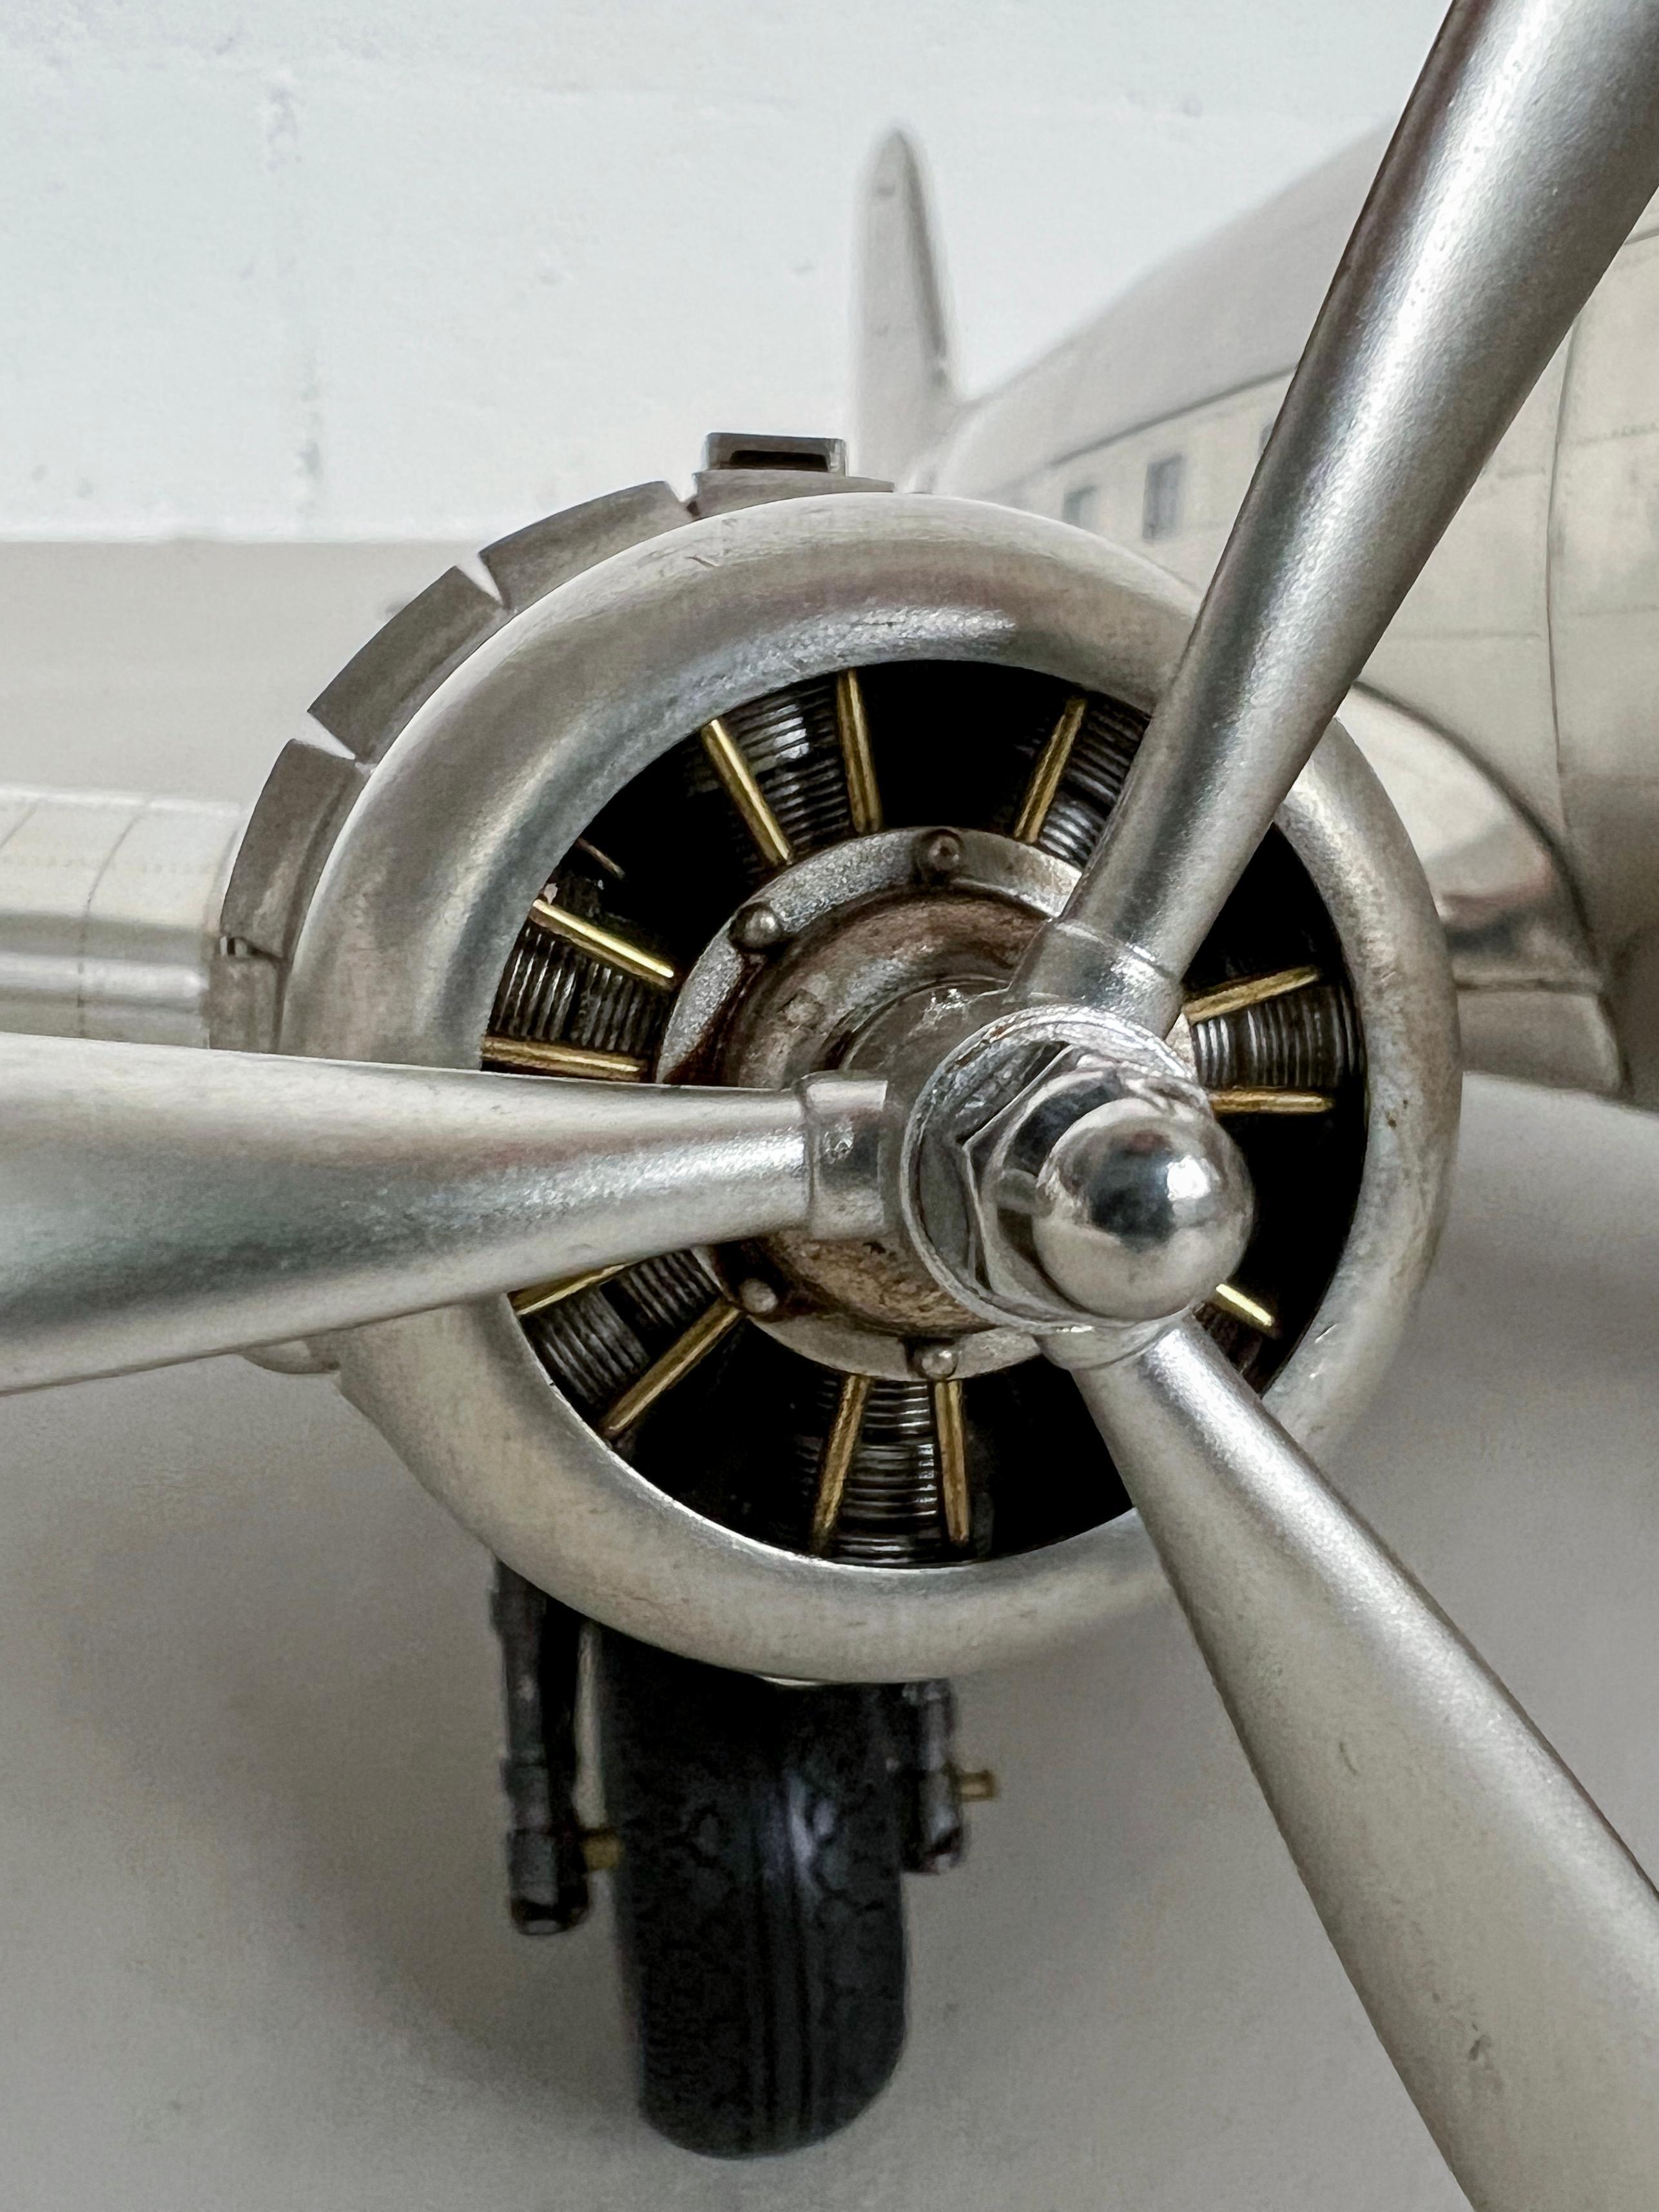 Contemporary Douglas Dc-3 Aircraft Model, Big Size, Richly Detailed, Streamlined Metal Plane